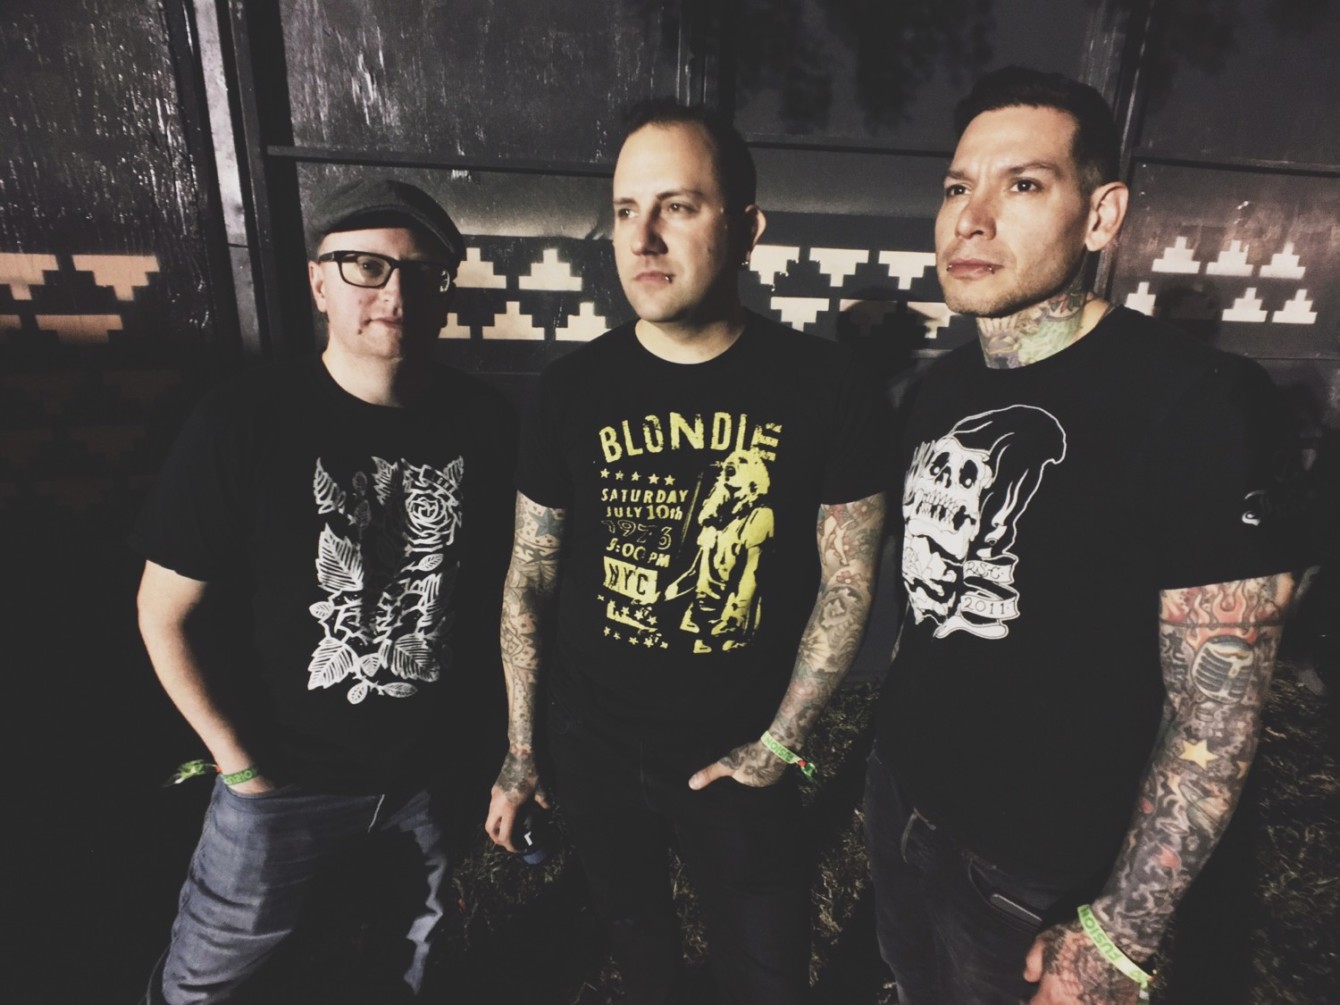 MxPx Drop The Most Epic Box Set of All TimeSUBSCRIBE TO OUR NEWSLETTERRECENTLY COMMENTEDRECENT NEWSREVIEWSINTERVIEWS